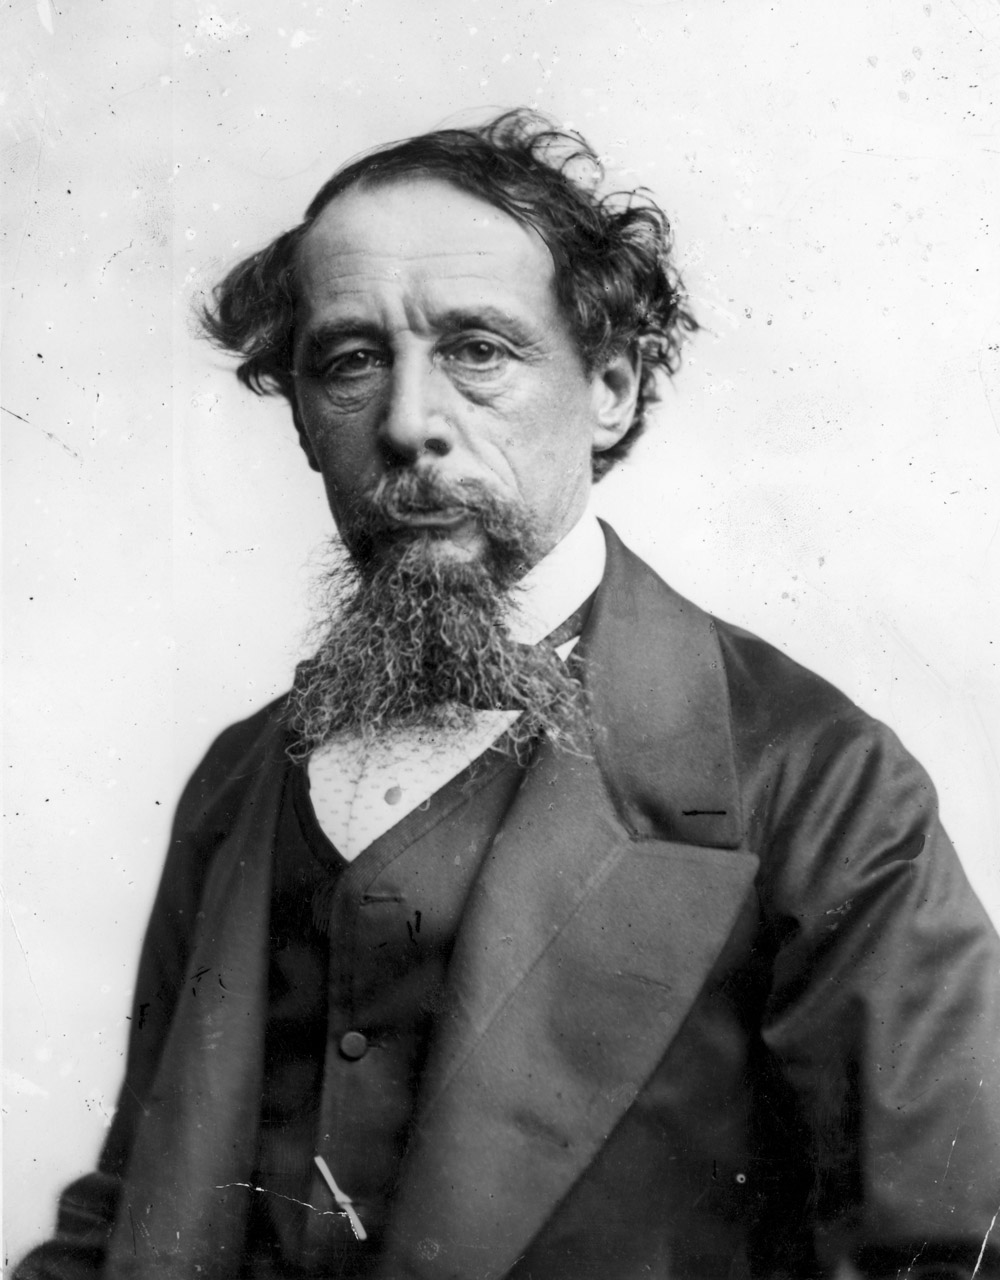 English novelist Charles Dickens (1812 - 1870).                                                                                                                                         (Photo by Rischgitz/Getty Images). Source: Wikimedia Commons